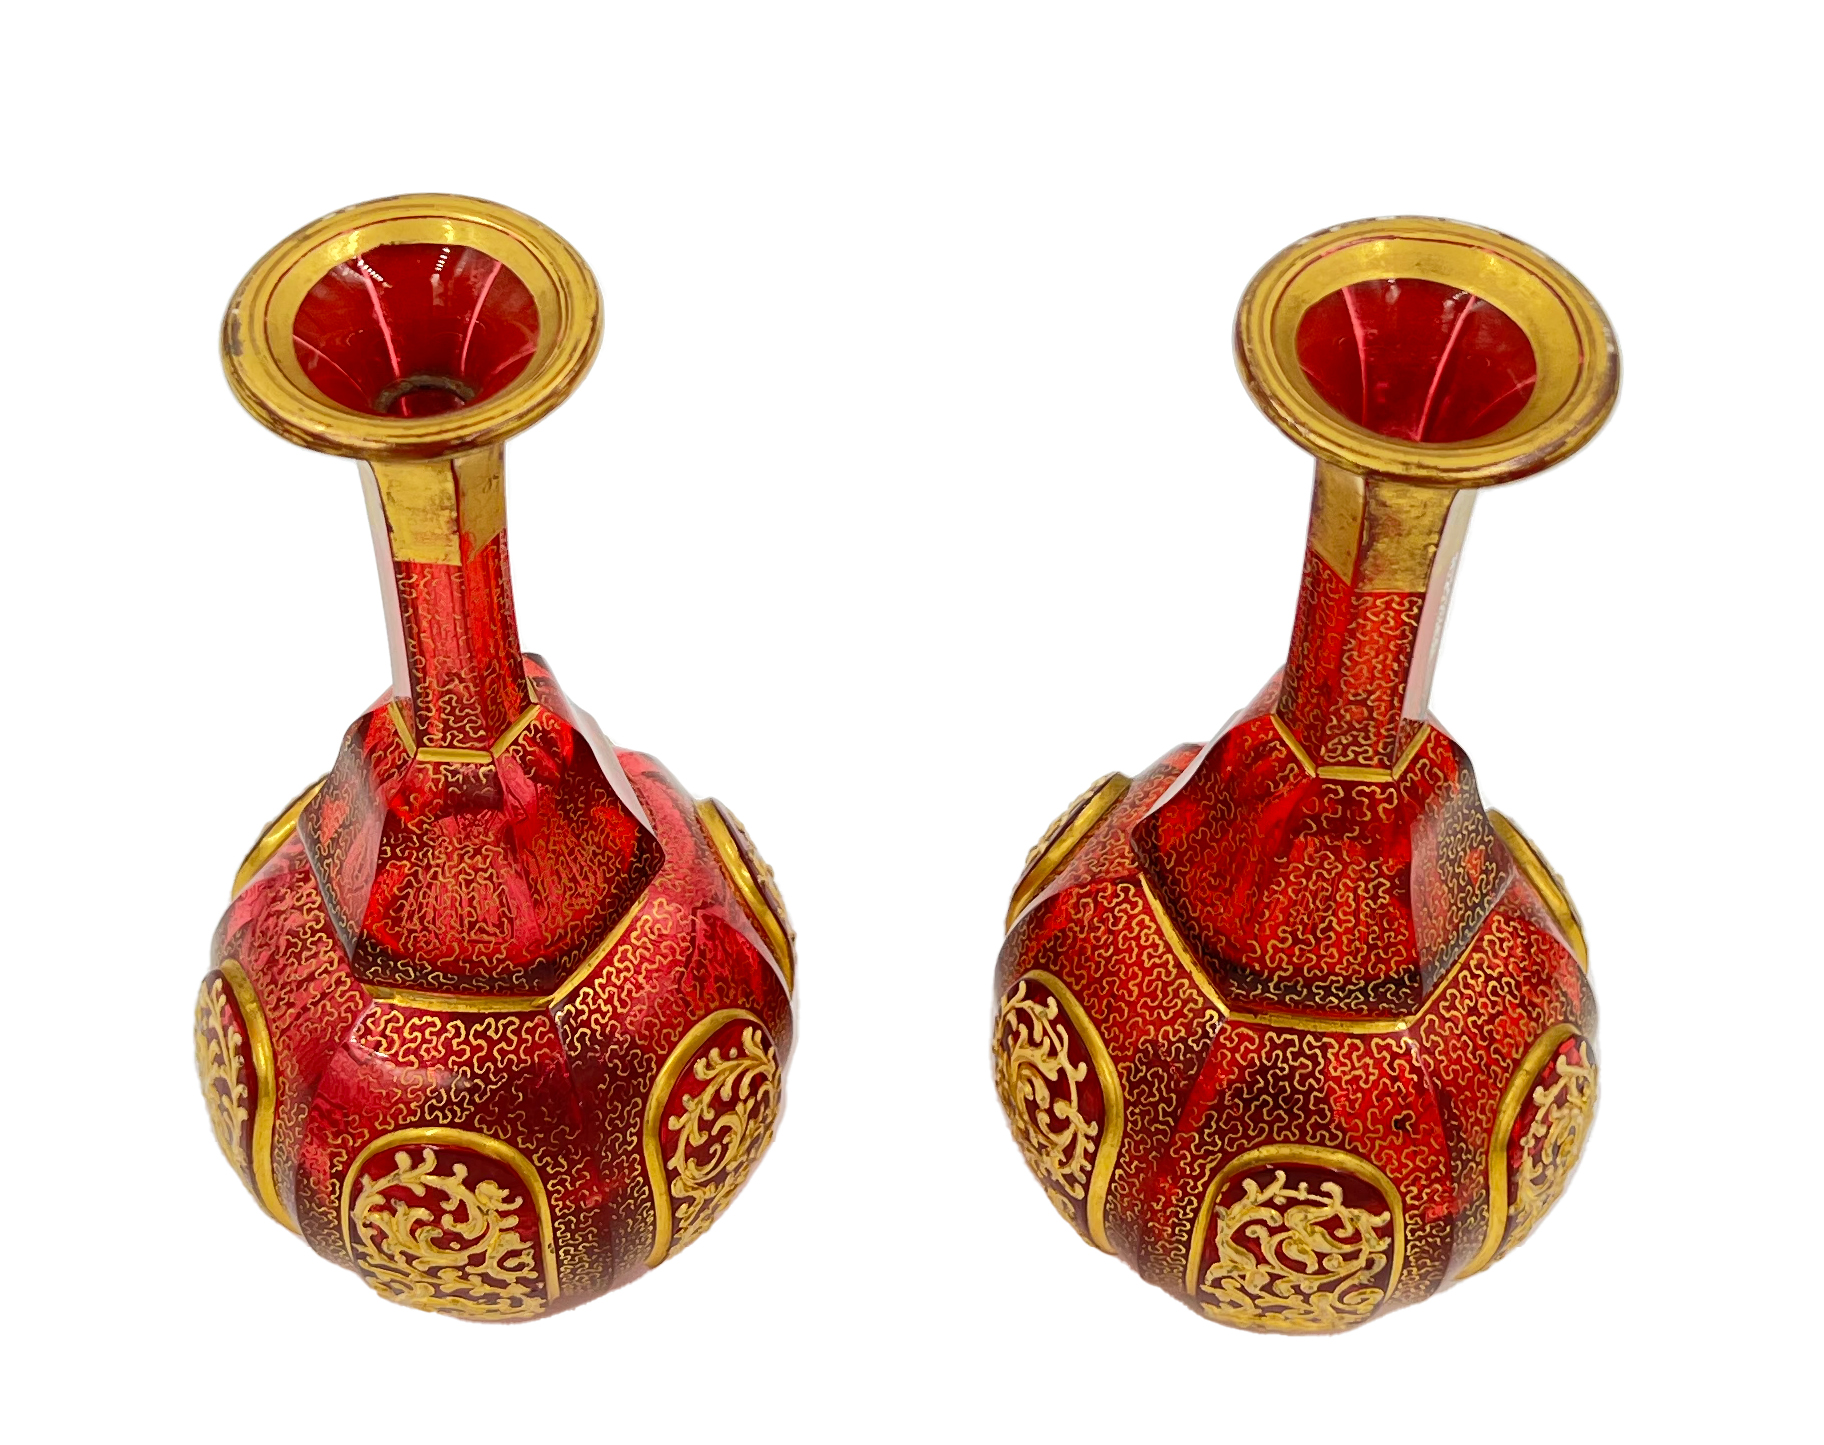 PAIR OF RUBY AND GOLD GILDED BOHEMIAN GLASS VASES - Image 2 of 2